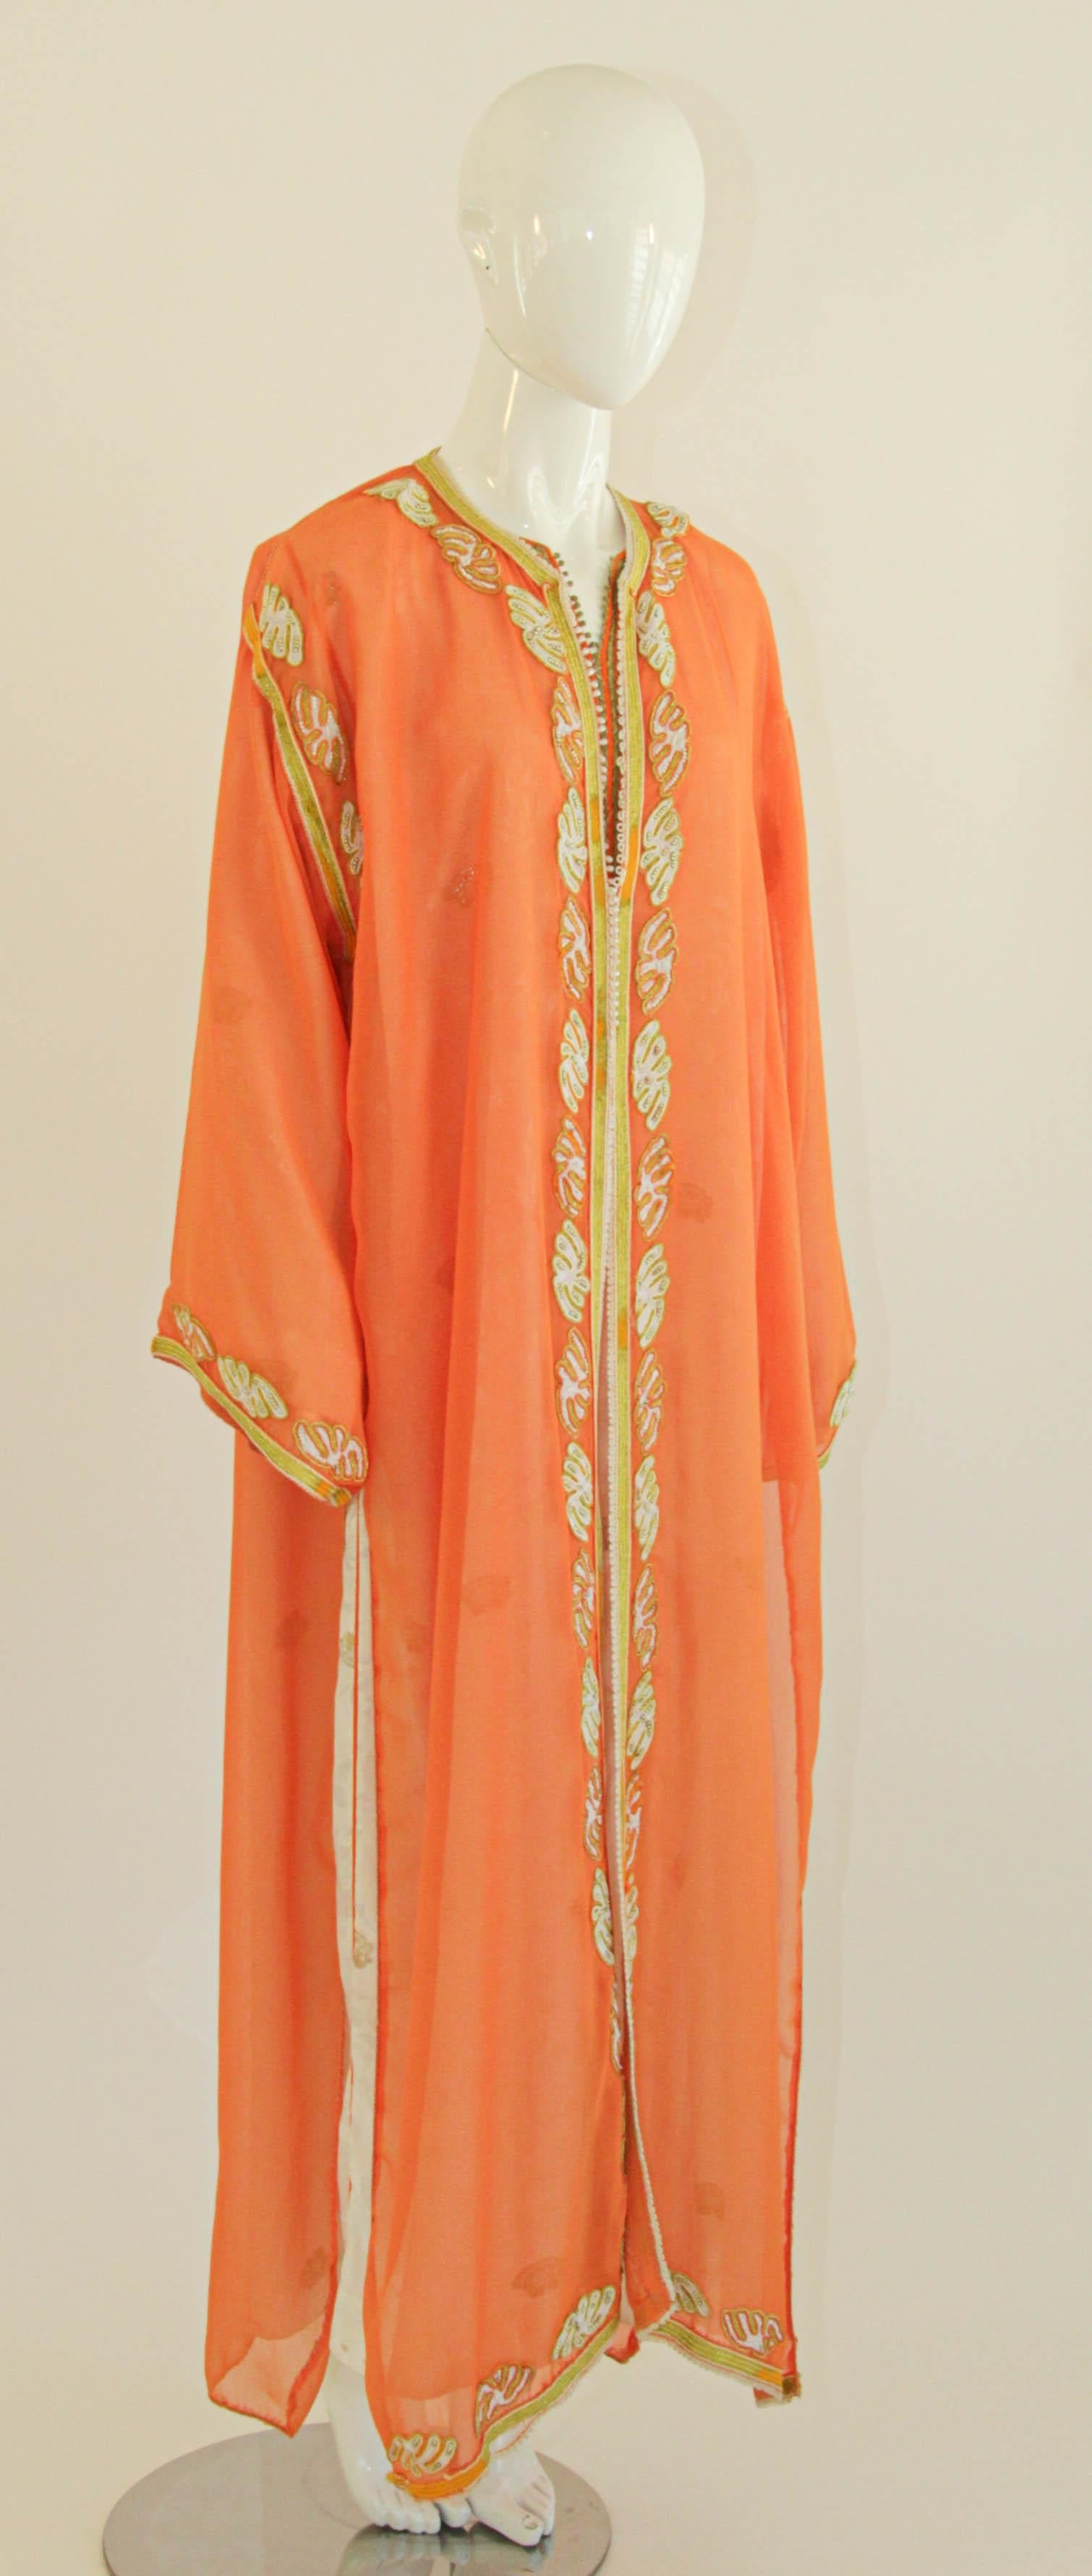 Elegant Moroccan caftan in orange silk georgette see through chiffon.
A beautiful pick for summertime occasions, this kaftan maxi dress is crafted from silky, feather-light see through fabric.
circa 1980s.
This long maxi dress set kaftan is